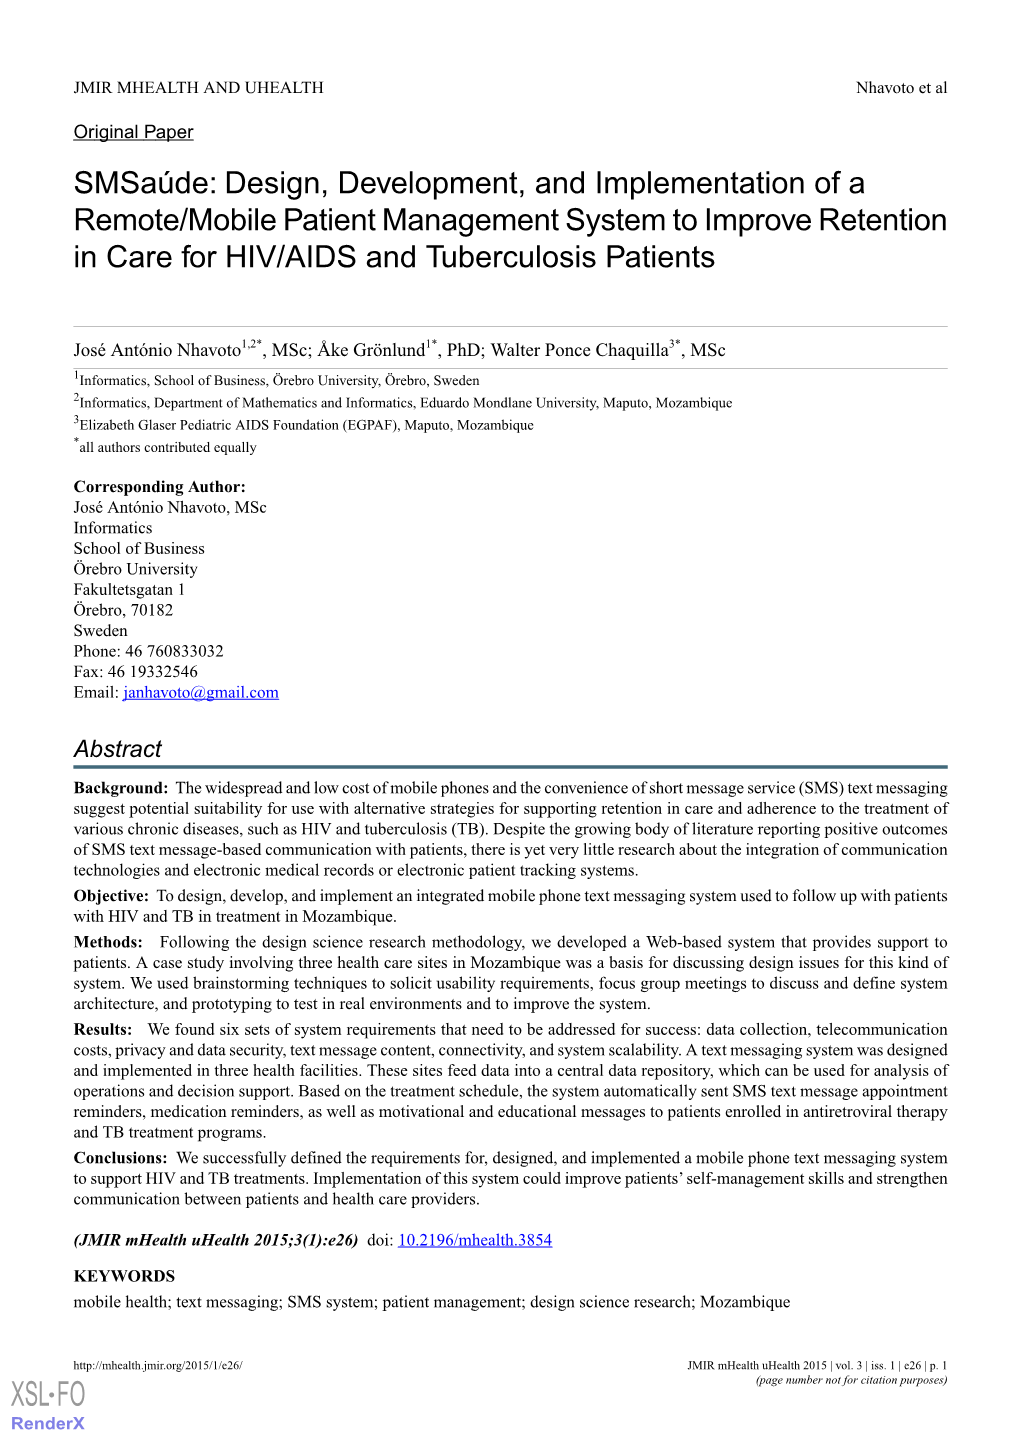 Smsaúde: Design, Development, and Implementation of a Remote/Mobile Patient Management System to Improve Retention in Care for HIV/AIDS and Tuberculosis Patients